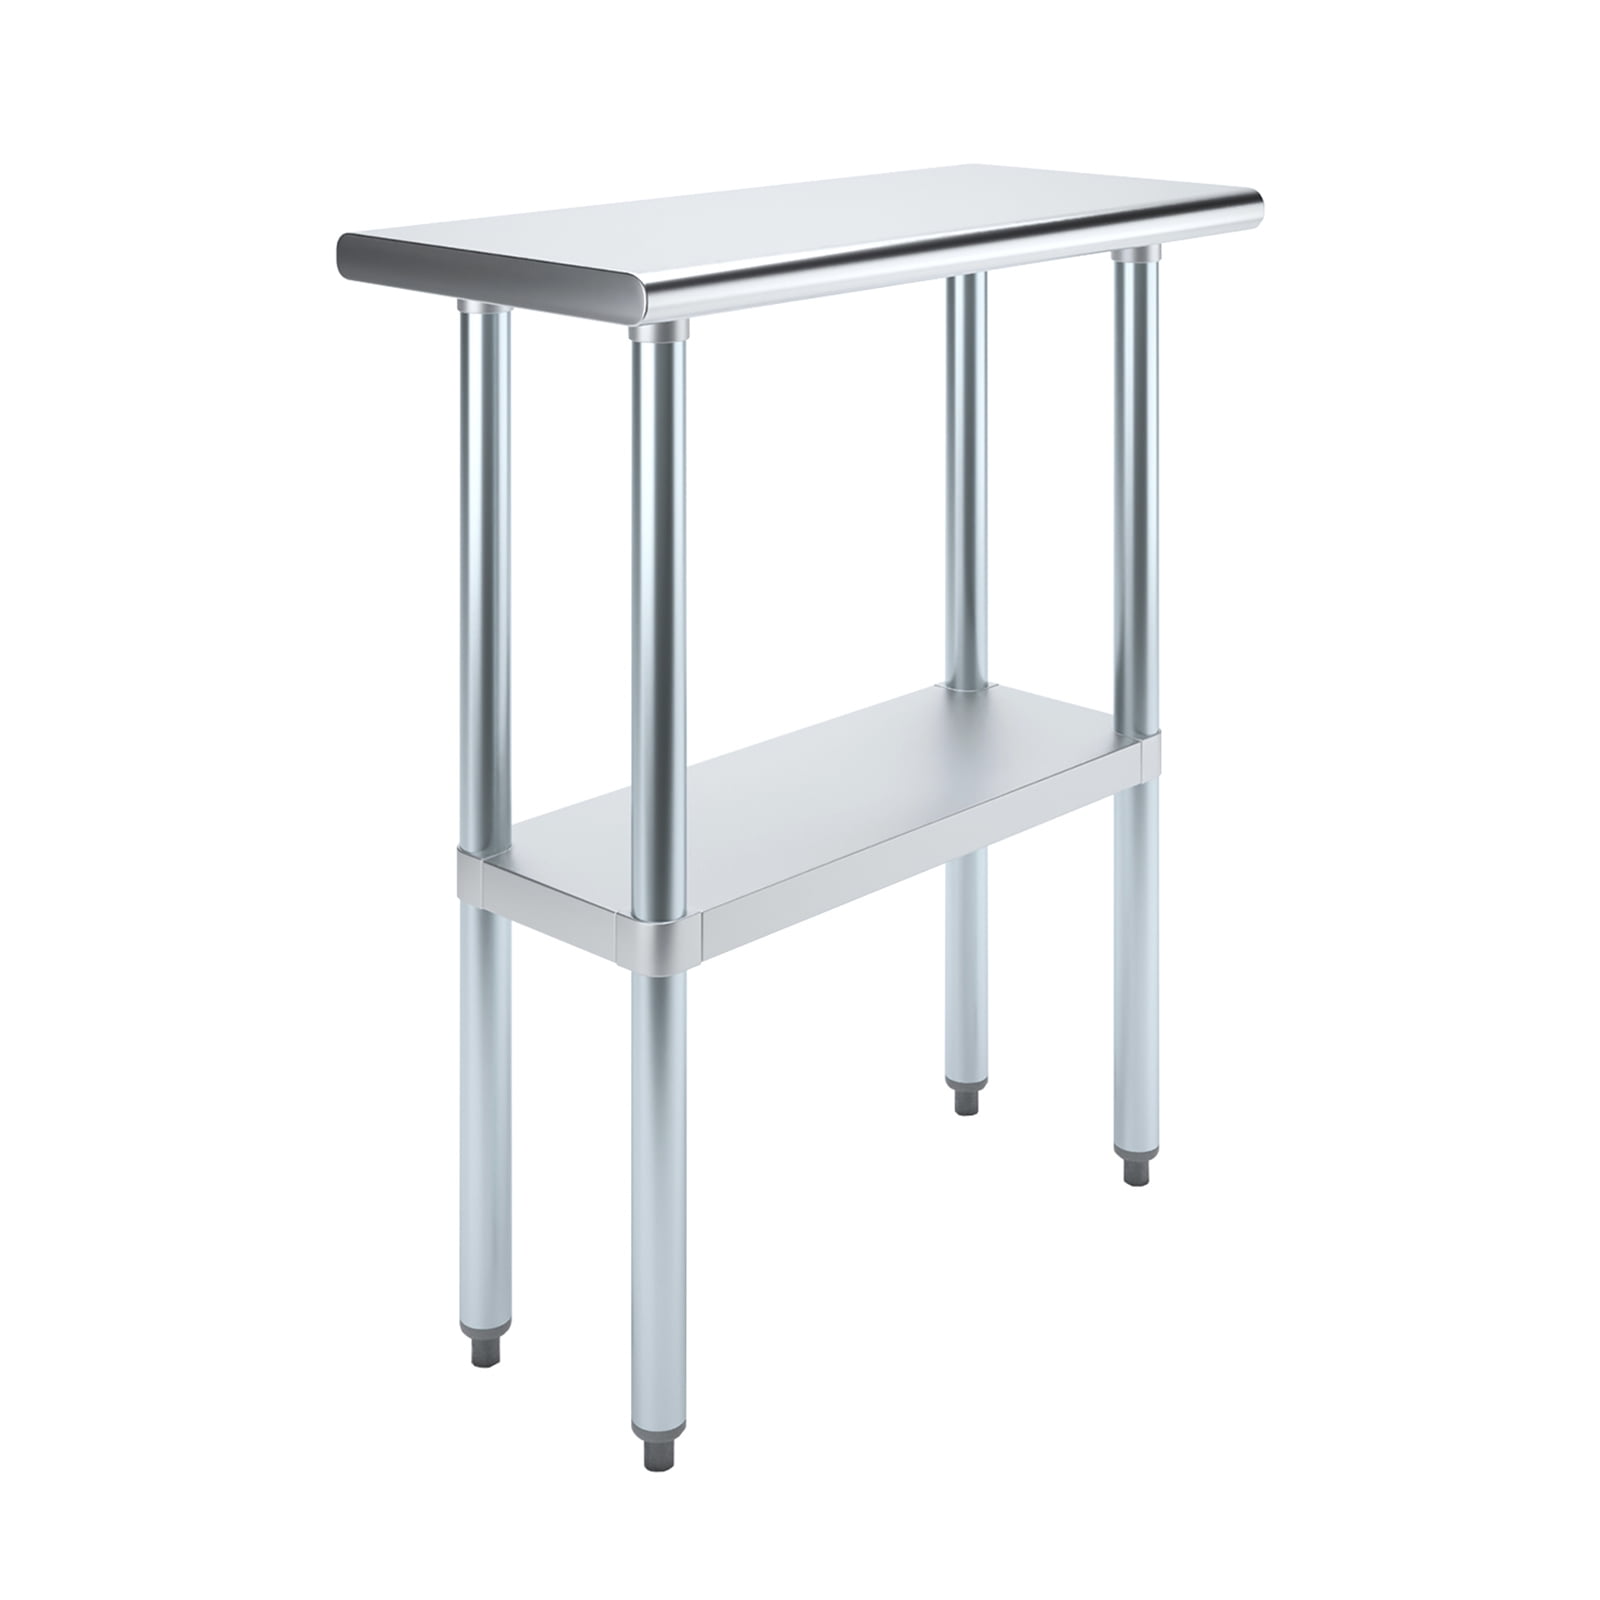 Increased Kitchen Functionality: Stainless Steel Work Tables